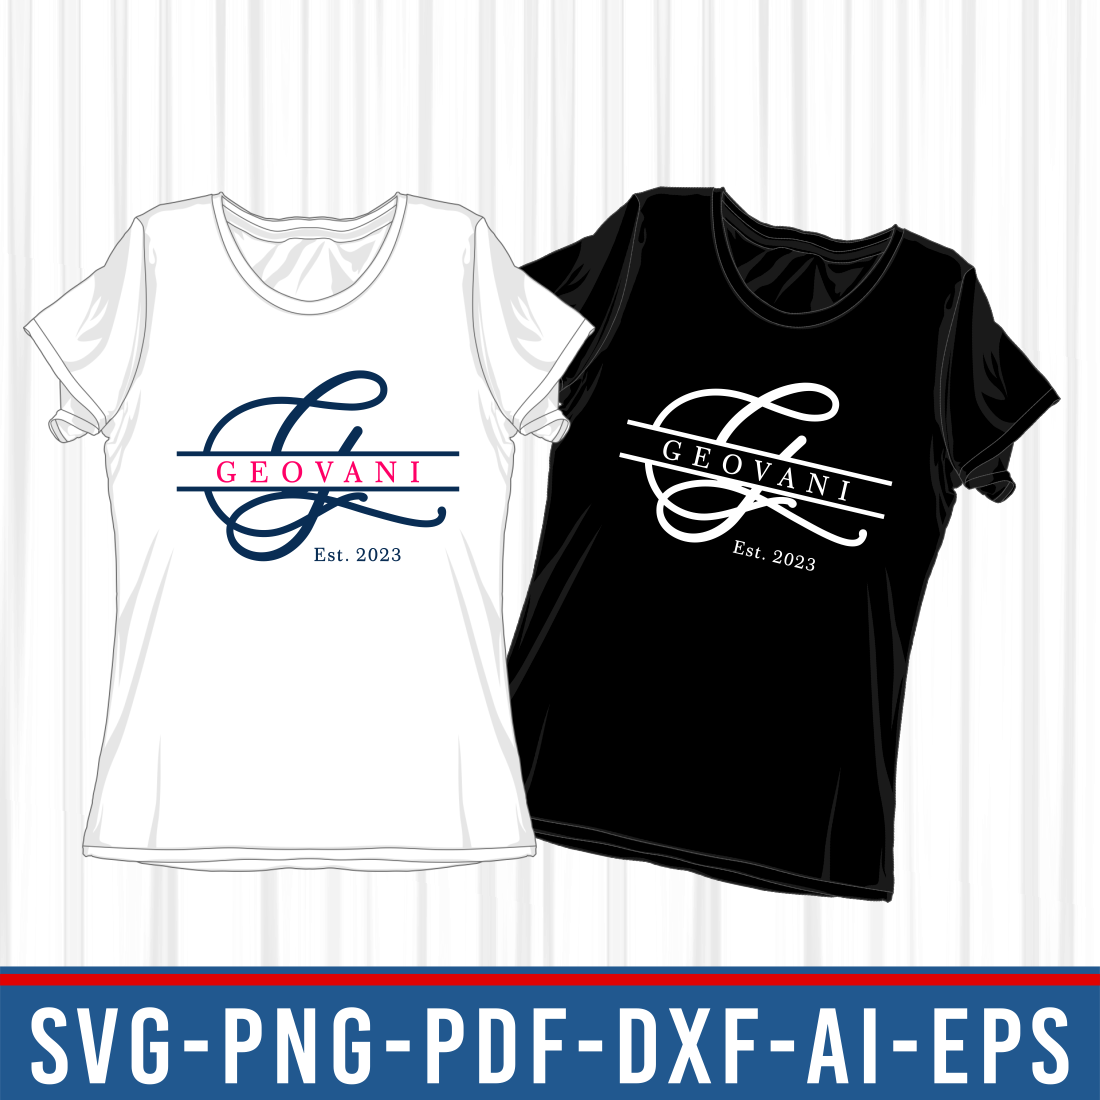 Two ladies's t - shirts with the name of each team.